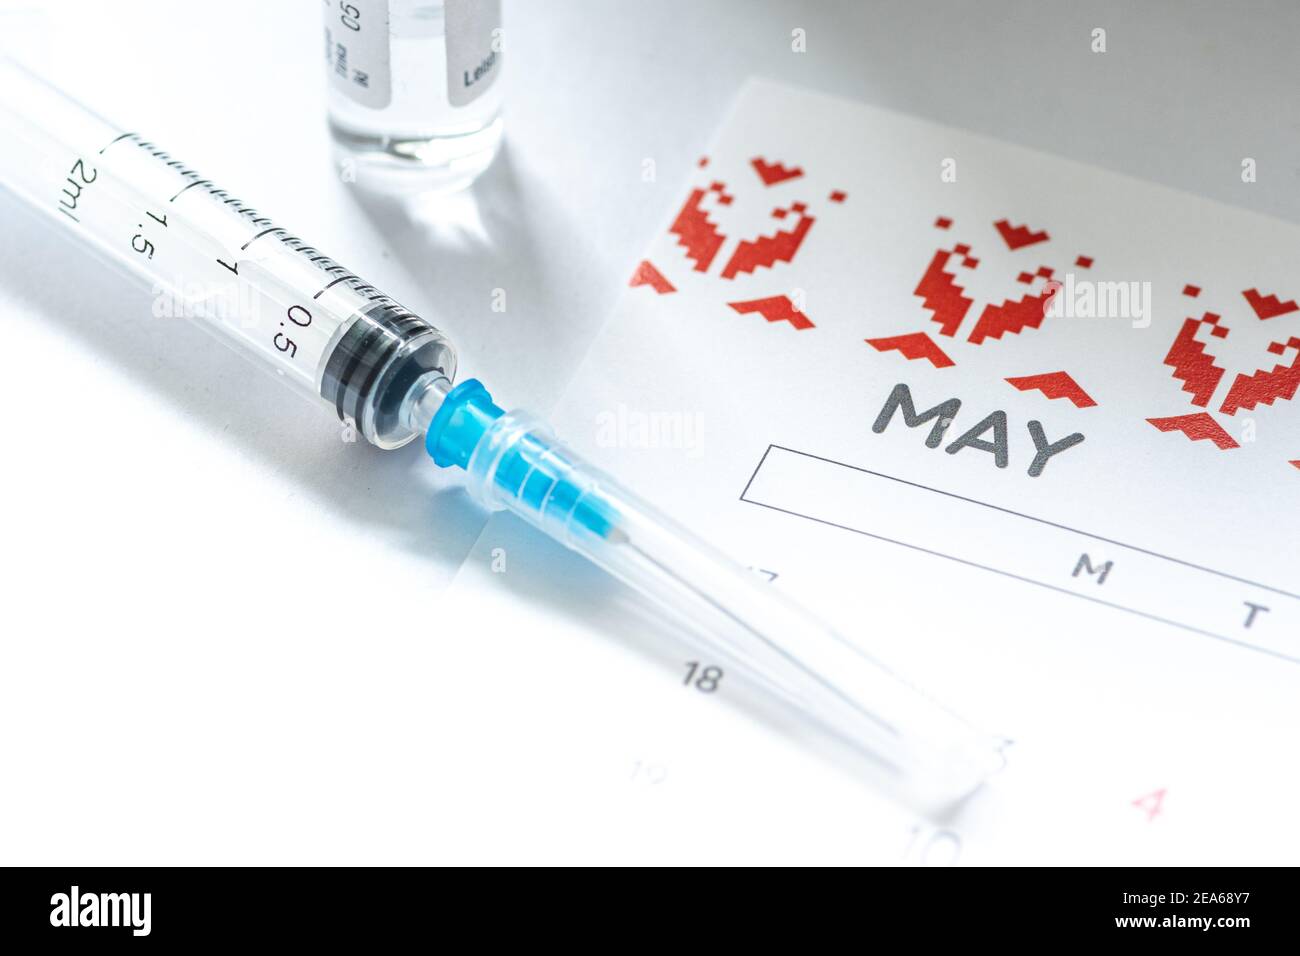 Syringe, glass vial or phial and calendar with month of May on a white table ready to be used. Covid or Coronavirus vaccine background, close up Stock Photo